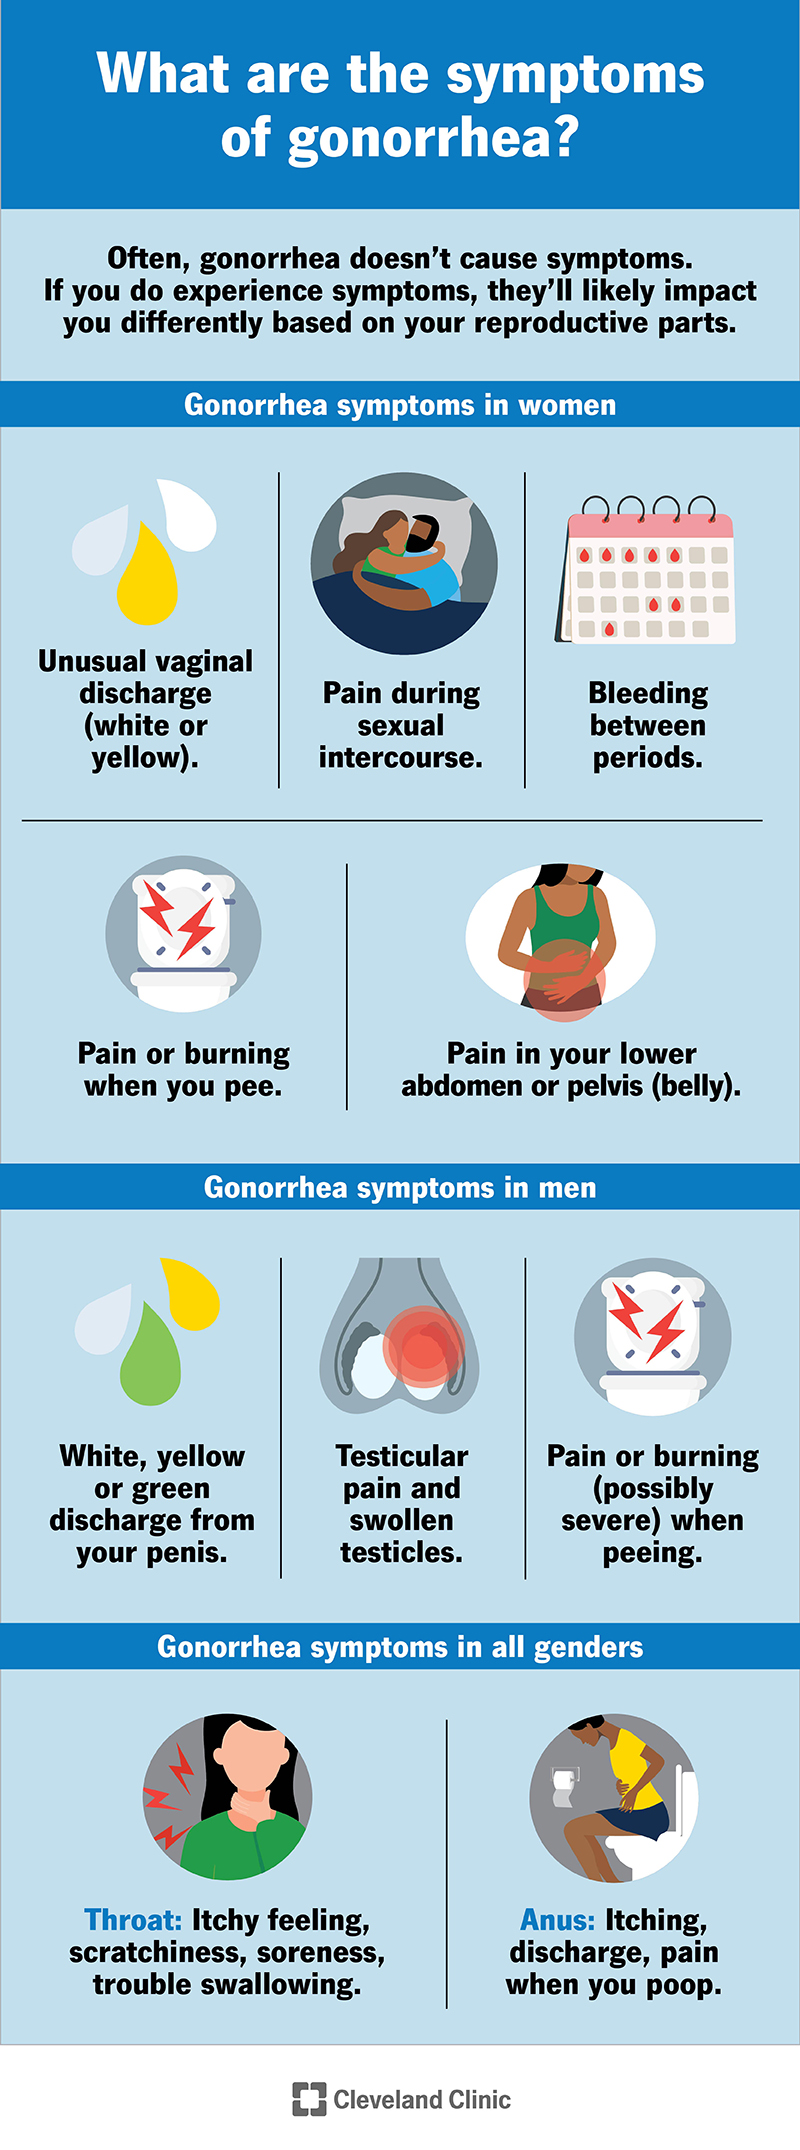 Gonorrhea may cause symptoms like an unusual discharge and pain or burning when you pee.